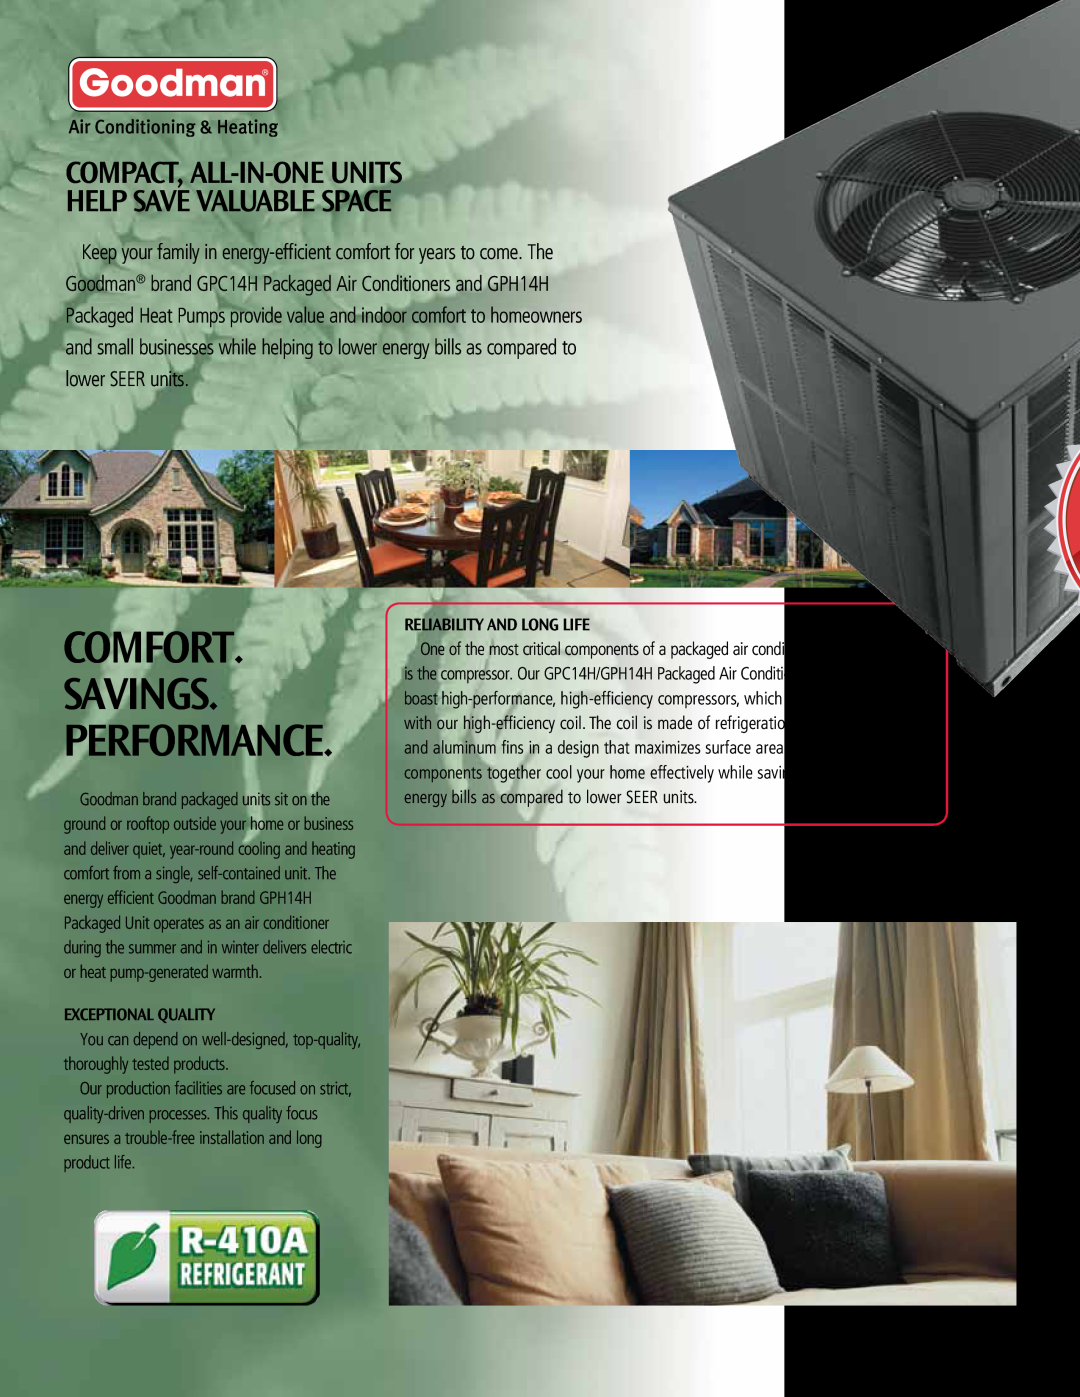 Goodman Mfg GPH14H COMFORT Savings Performance, COMPACT, ALL-IN-ONEUNITS help save VaLUABLE SPACE, exceptional quality 